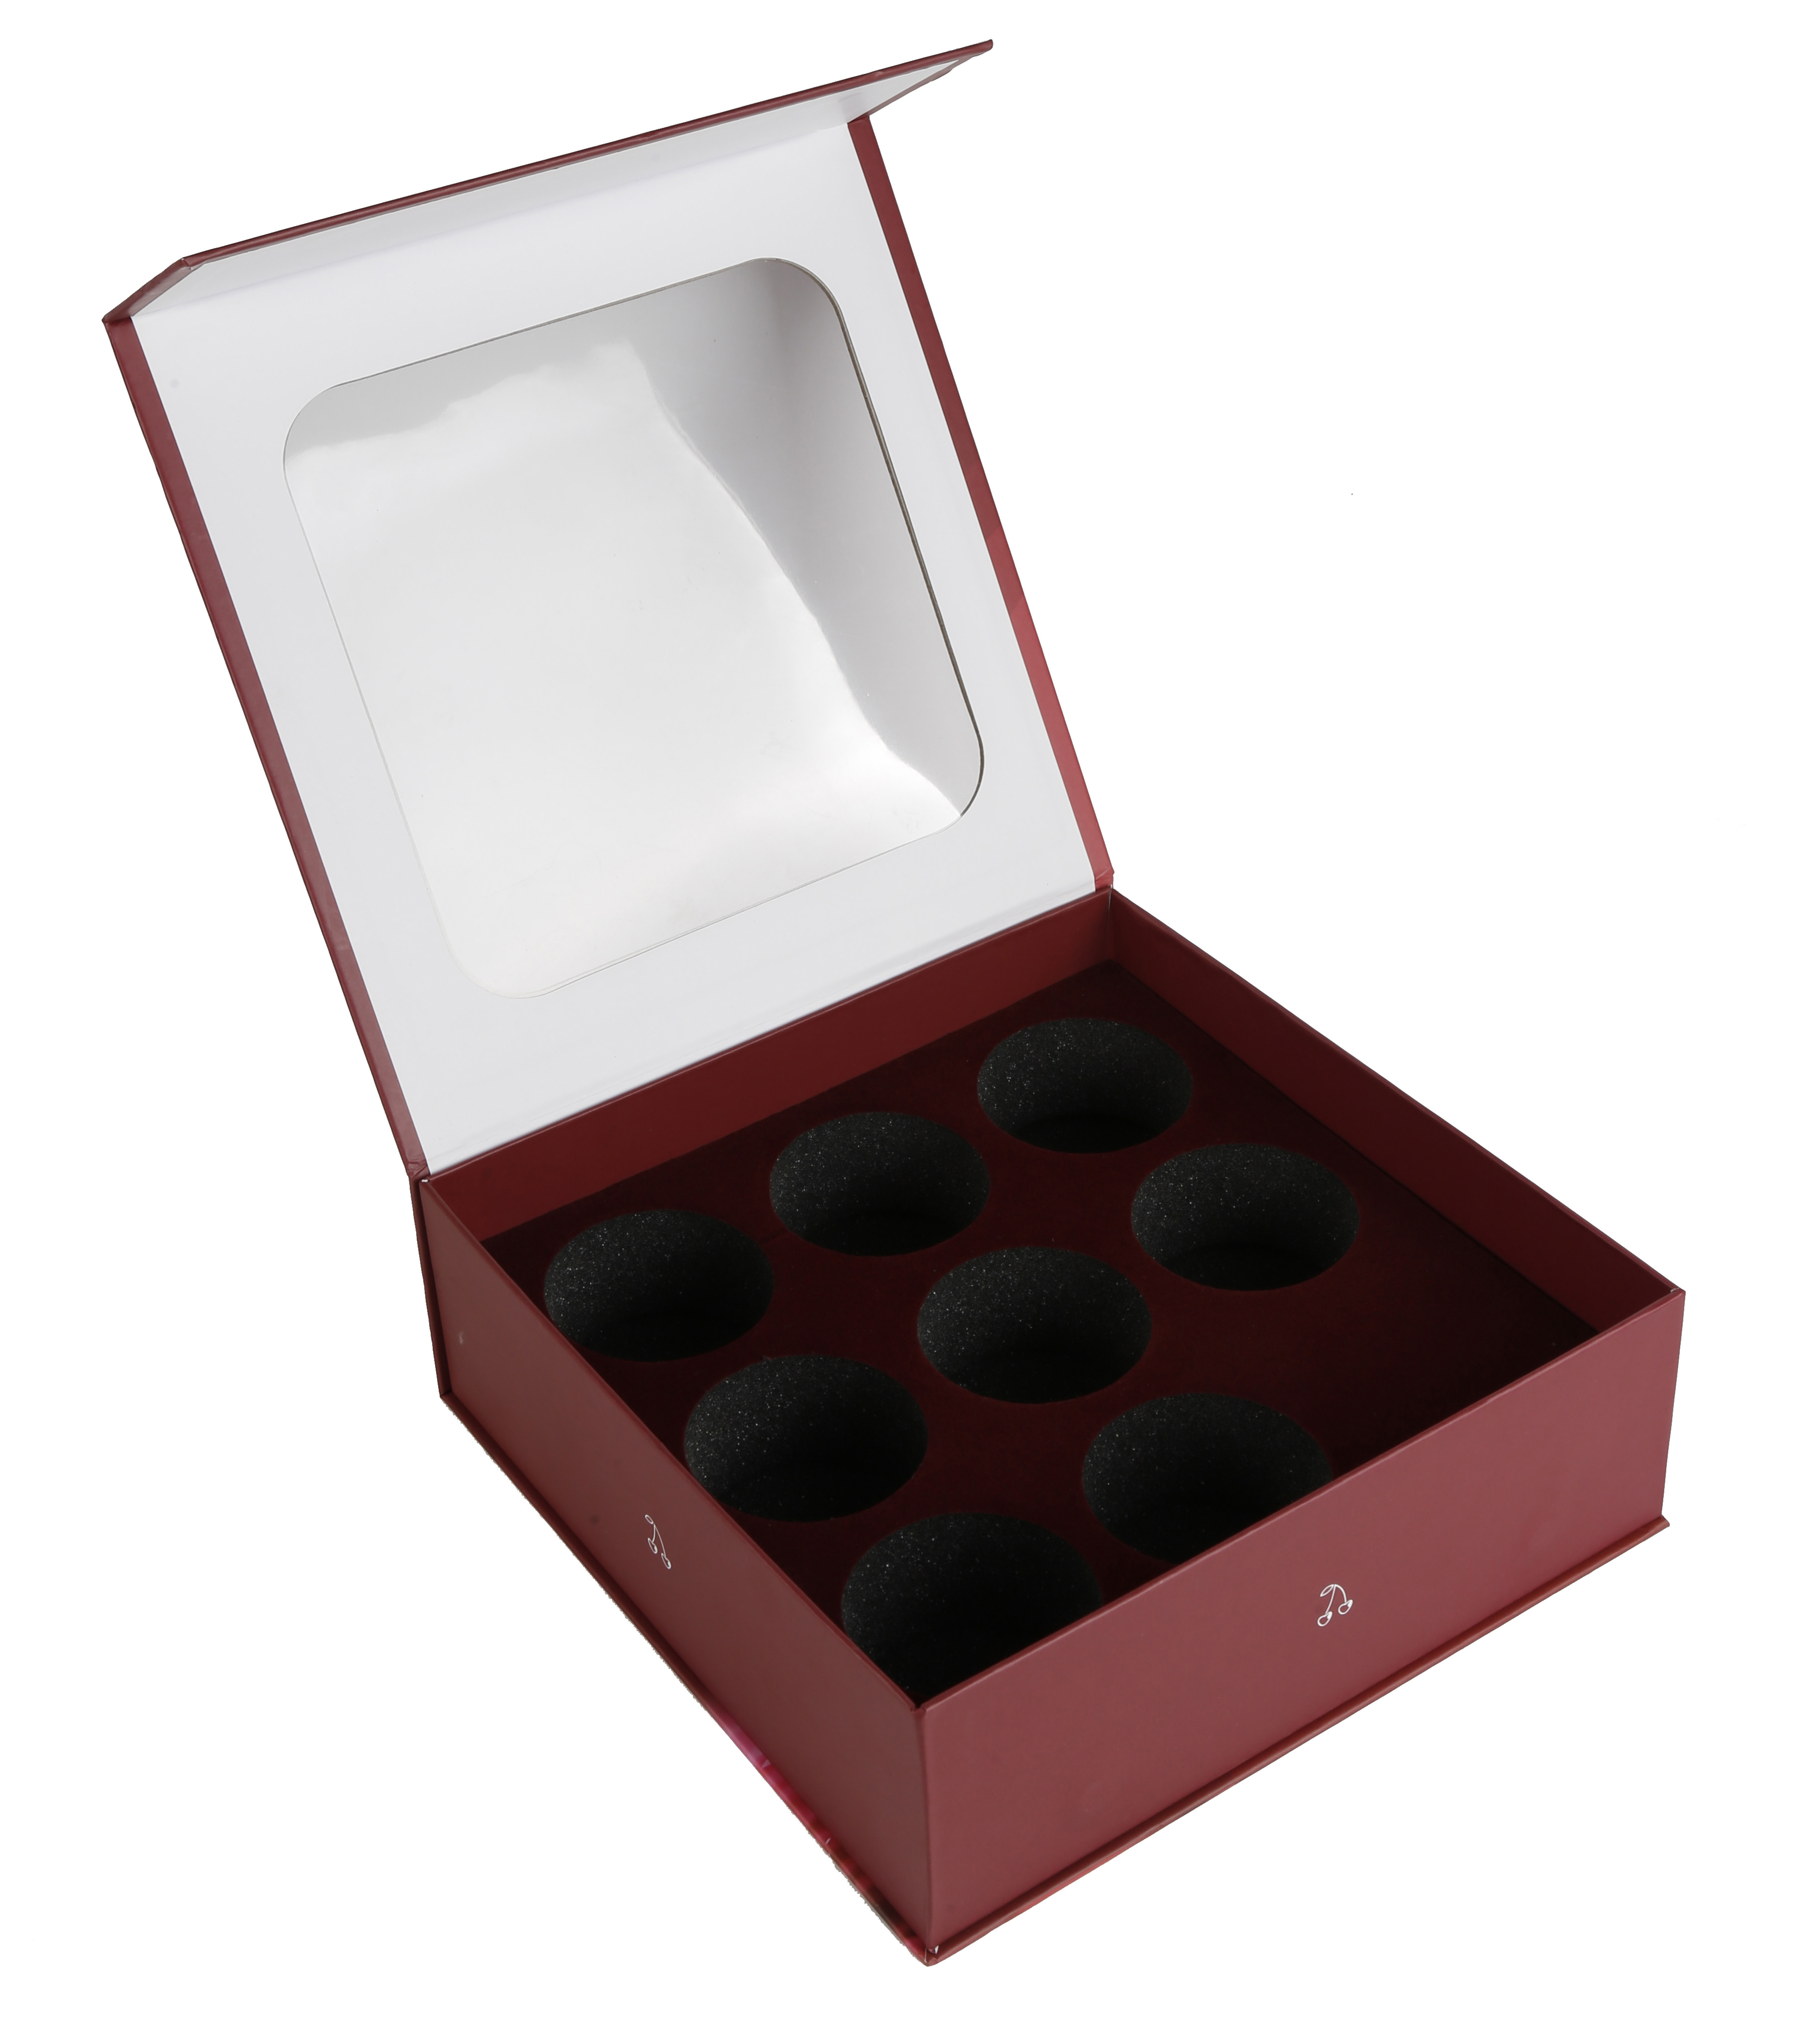 Customizable size and design of exquisite packing box with sponge inner holder